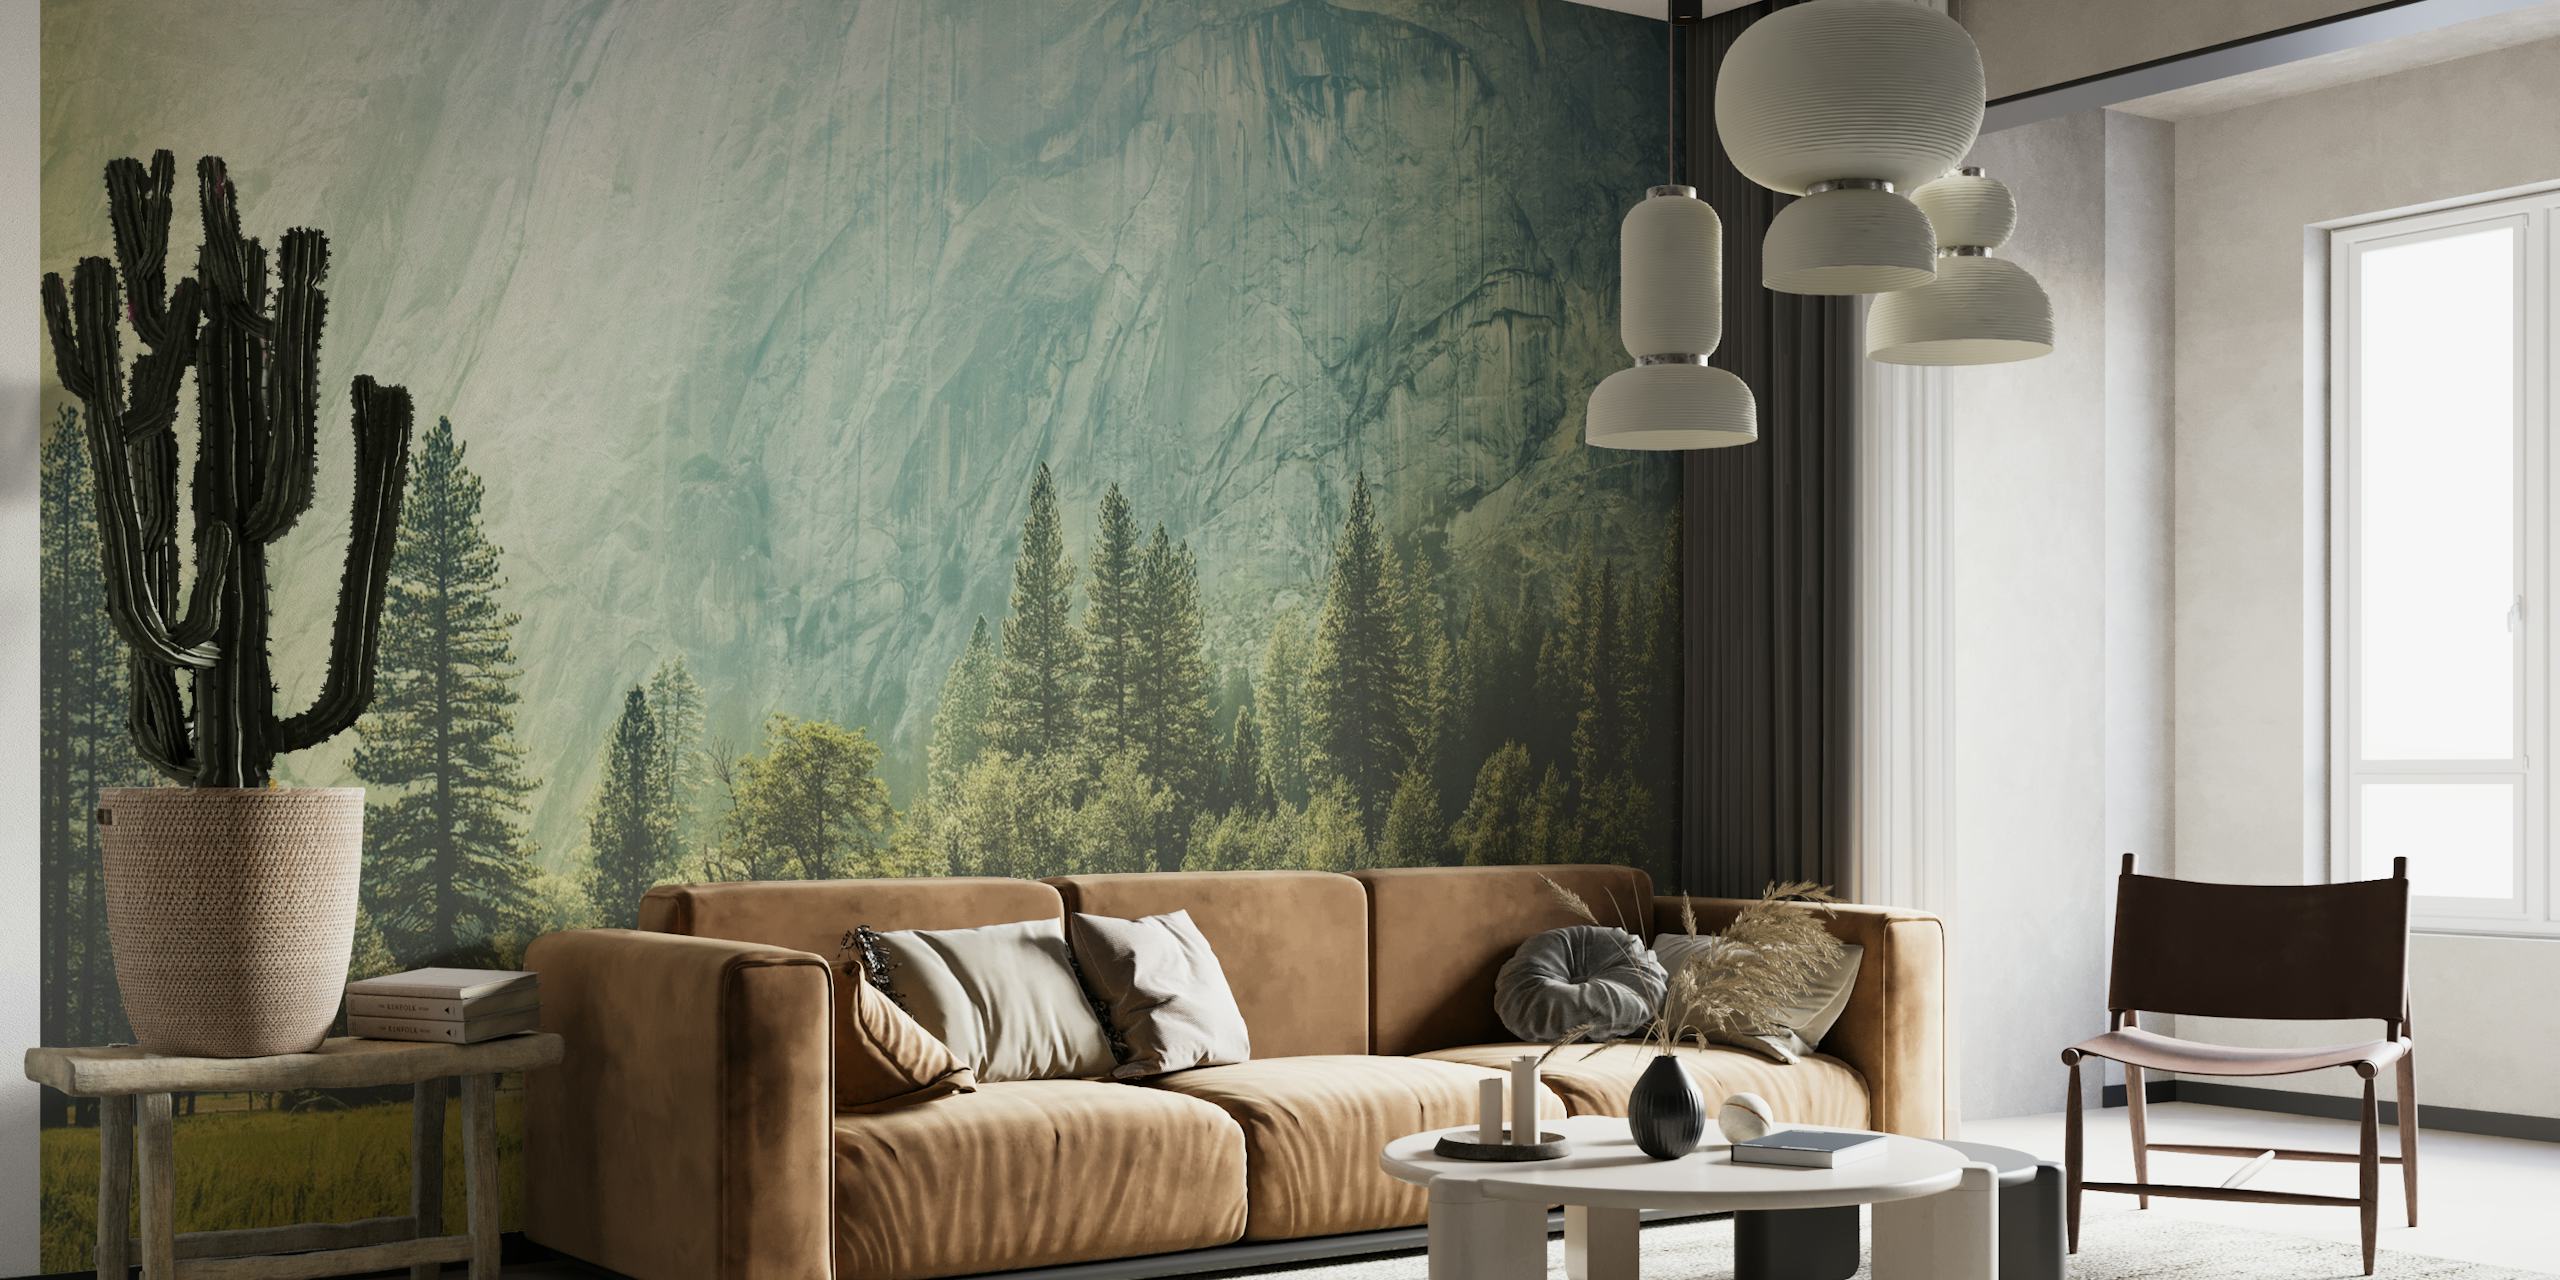 Yosemite Valley wall mural with towering trees and granite cliffs